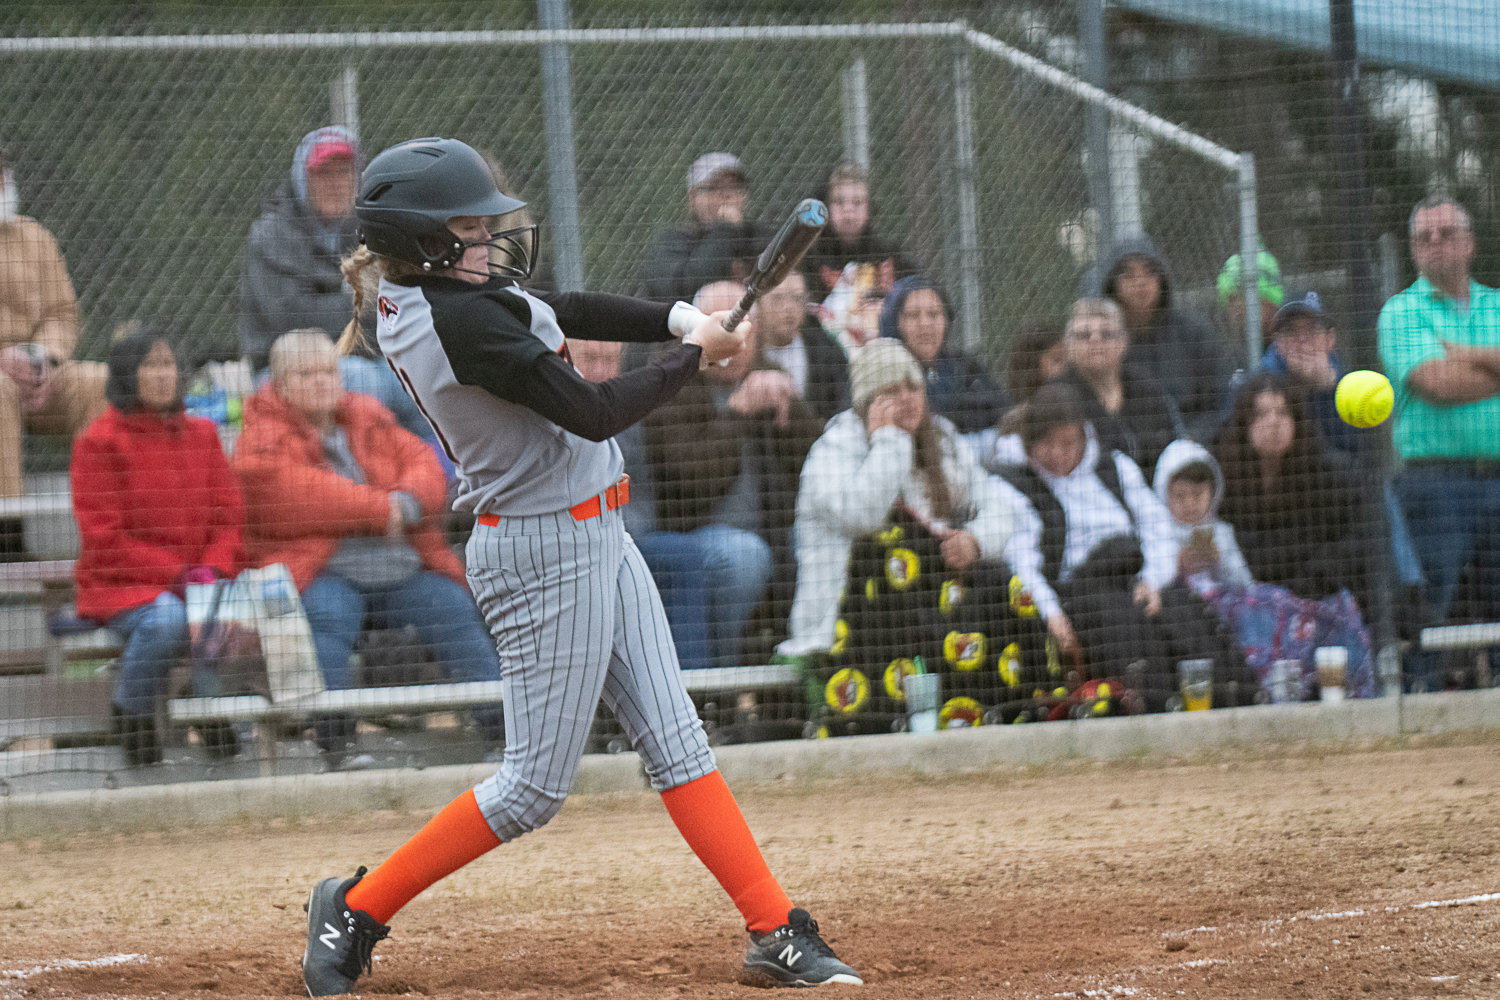 Brooklyn Sprague drills the ball during Centralia's 5-3 win over W.F. West on March 28.